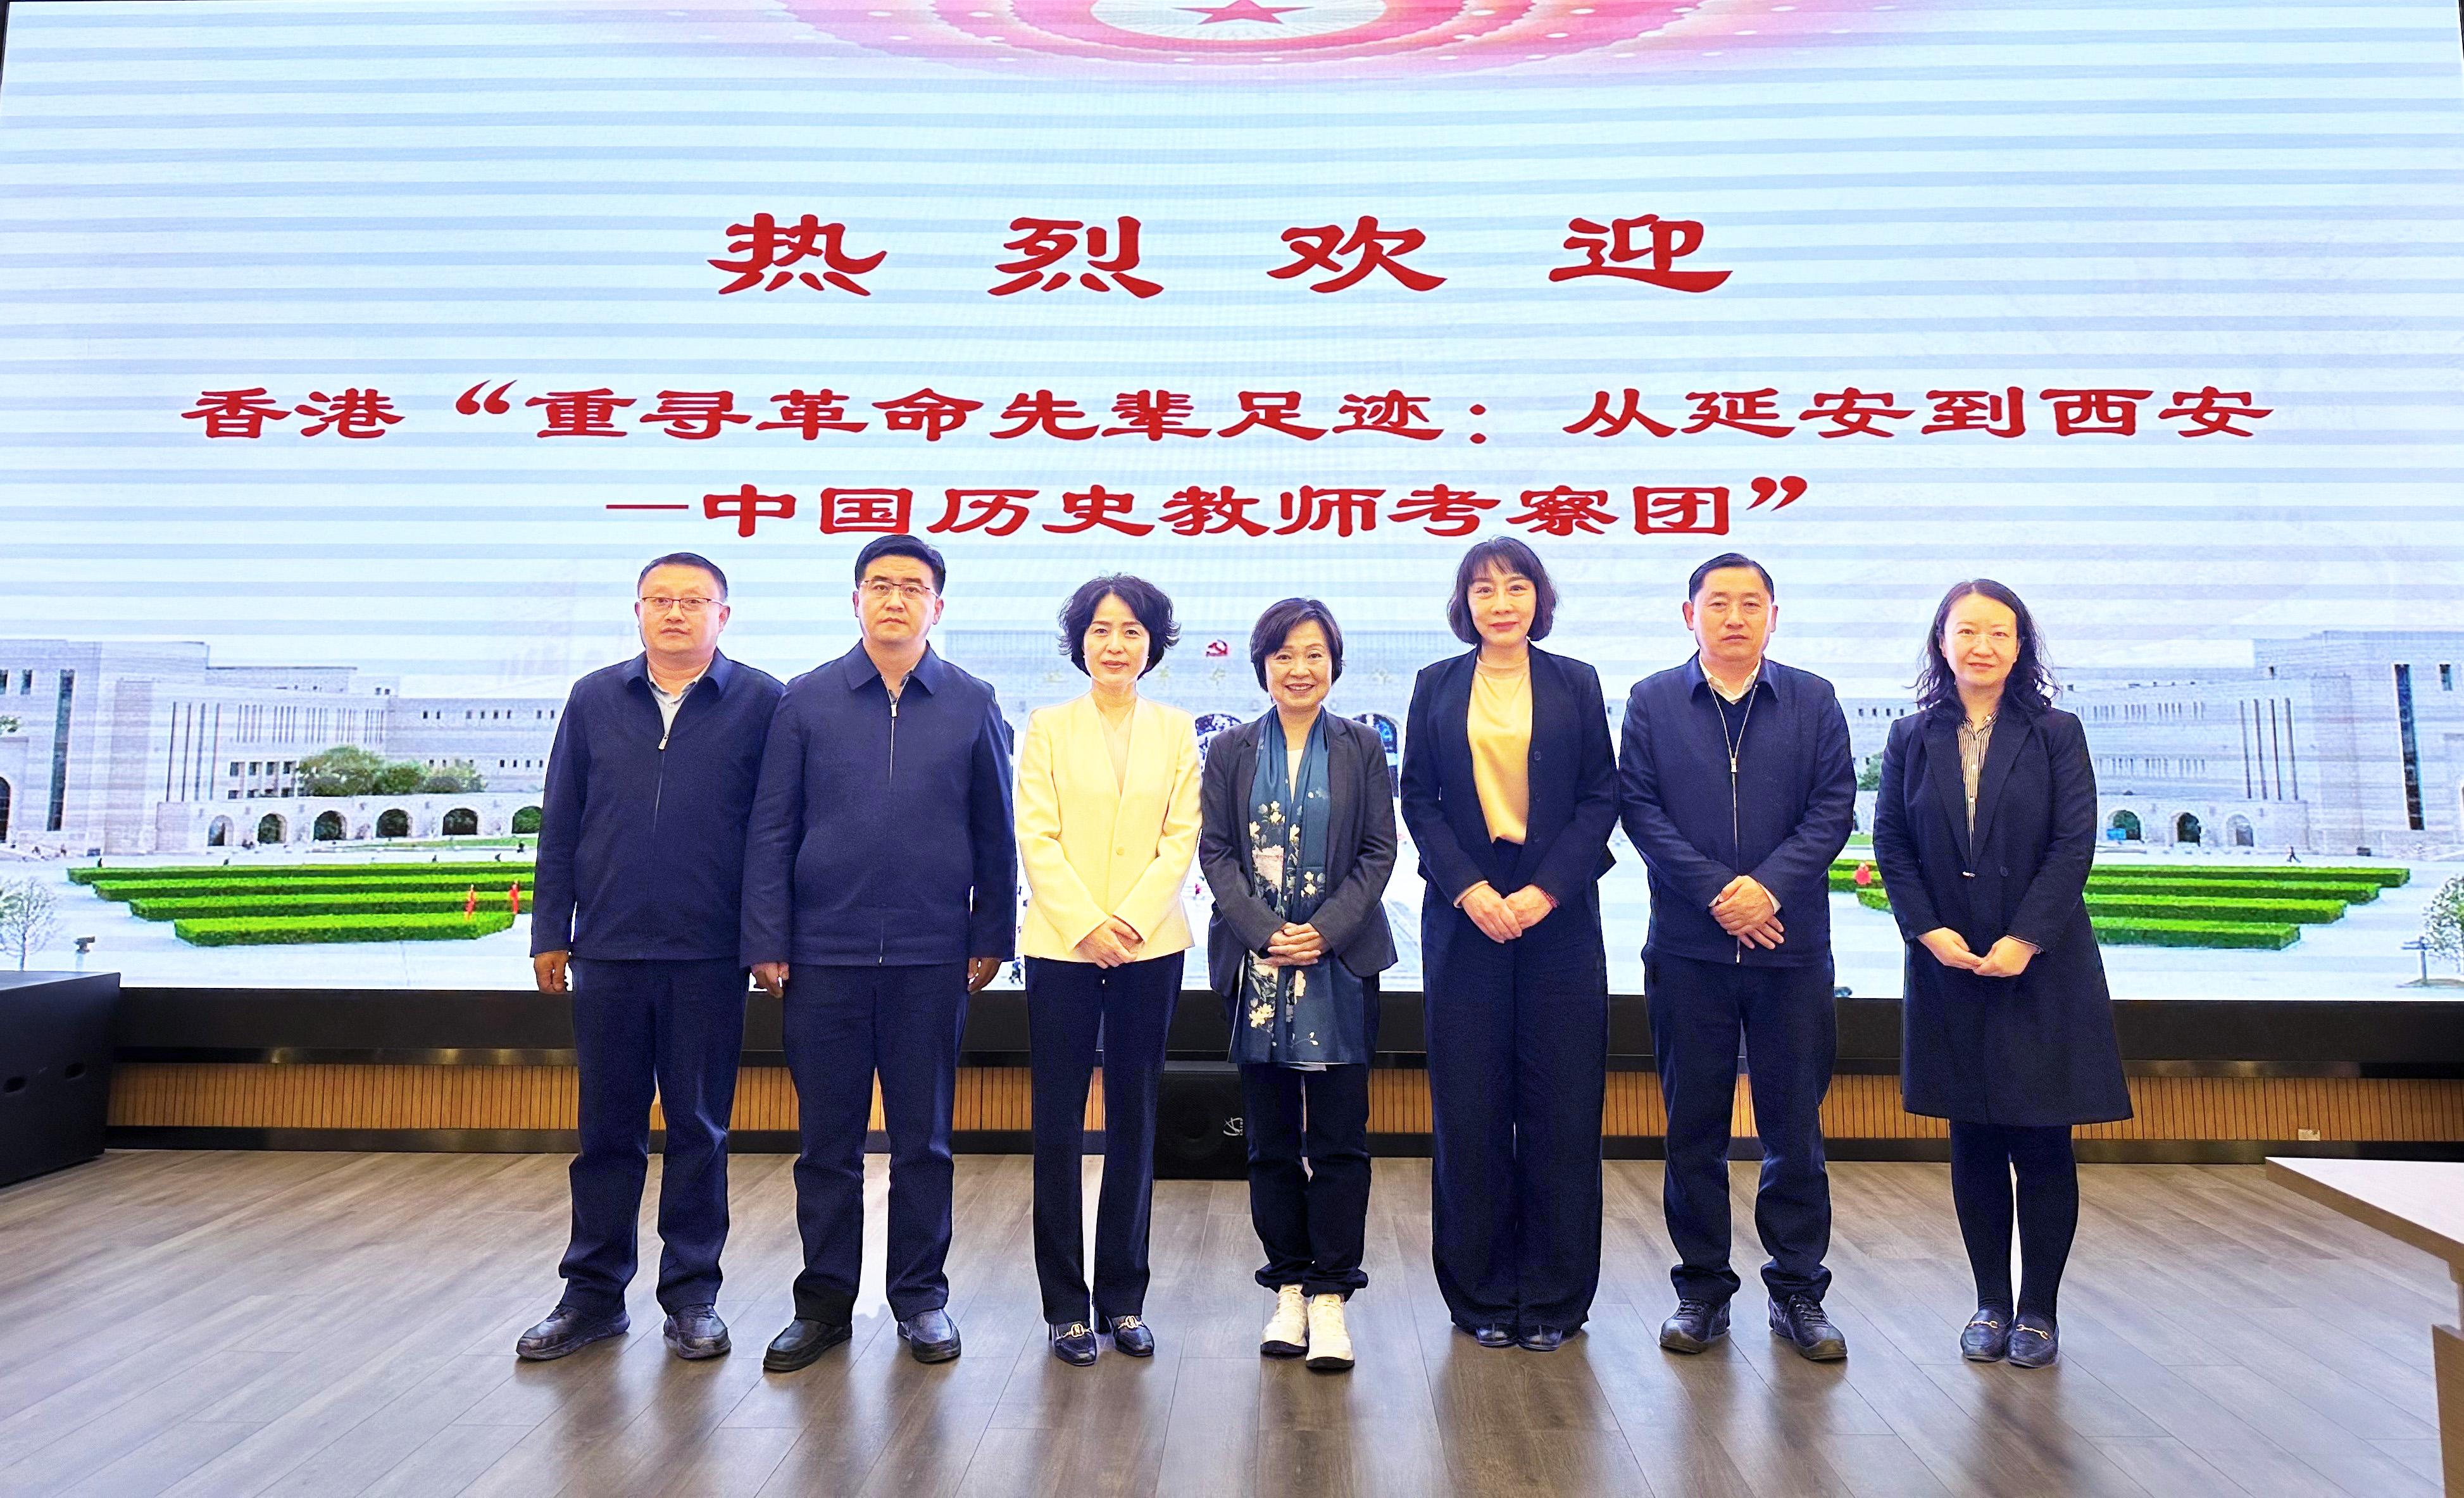 The Secretary for Education, Dr Choi Yuk-lin, leads a delegation of Chinese history teachers to visit Yan'an today (April 1). Photo shows Dr Choi (centre) and the representatives of the Department of Education of Shaanxi Province, Yan'an Municipal People's Government and the Education Bureau of Yan'an City.